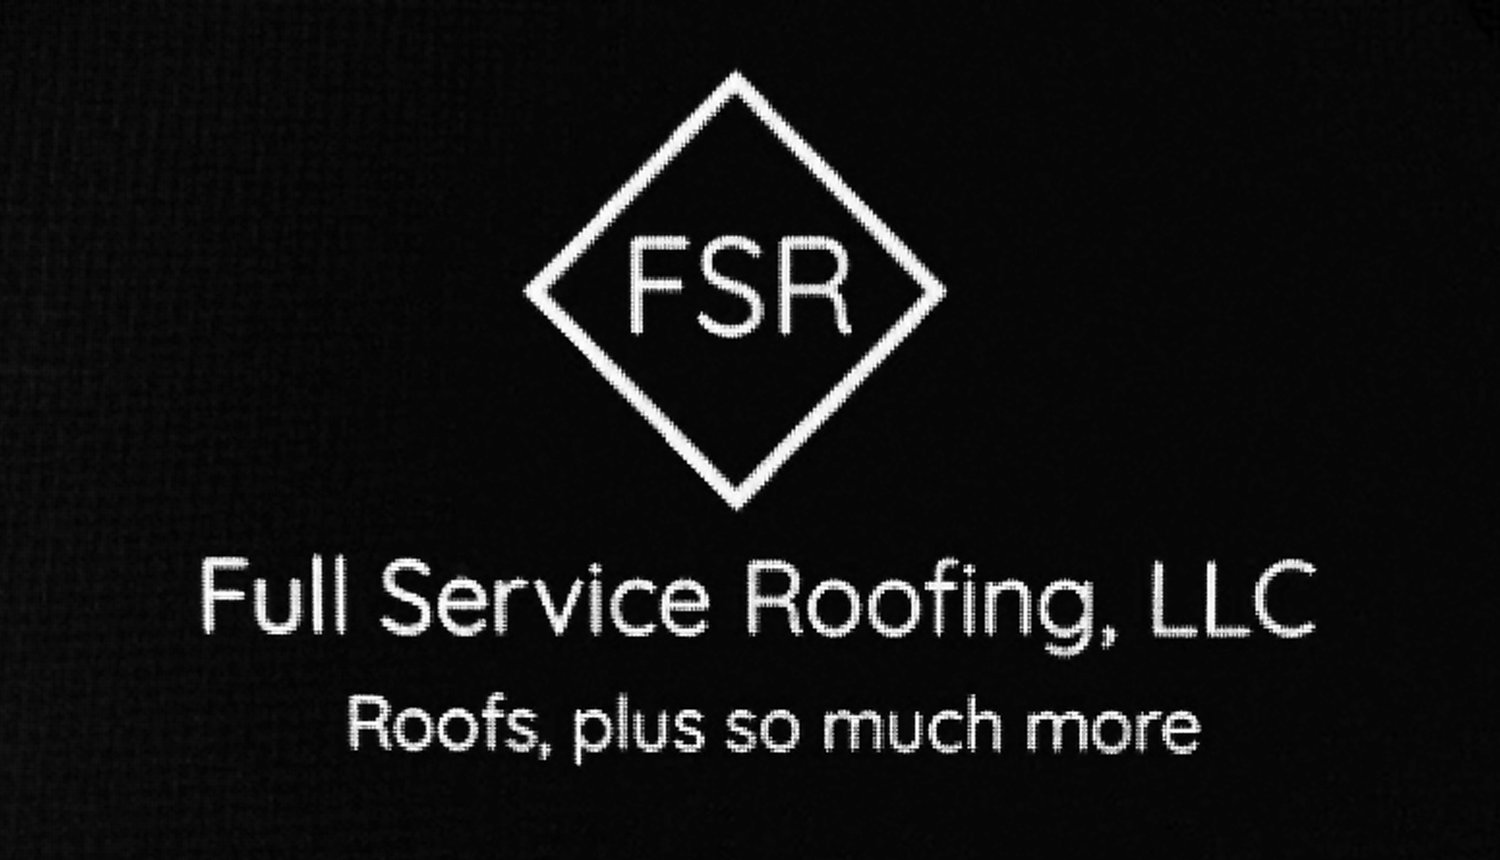 Full Service Roofing.  Storm Damage?